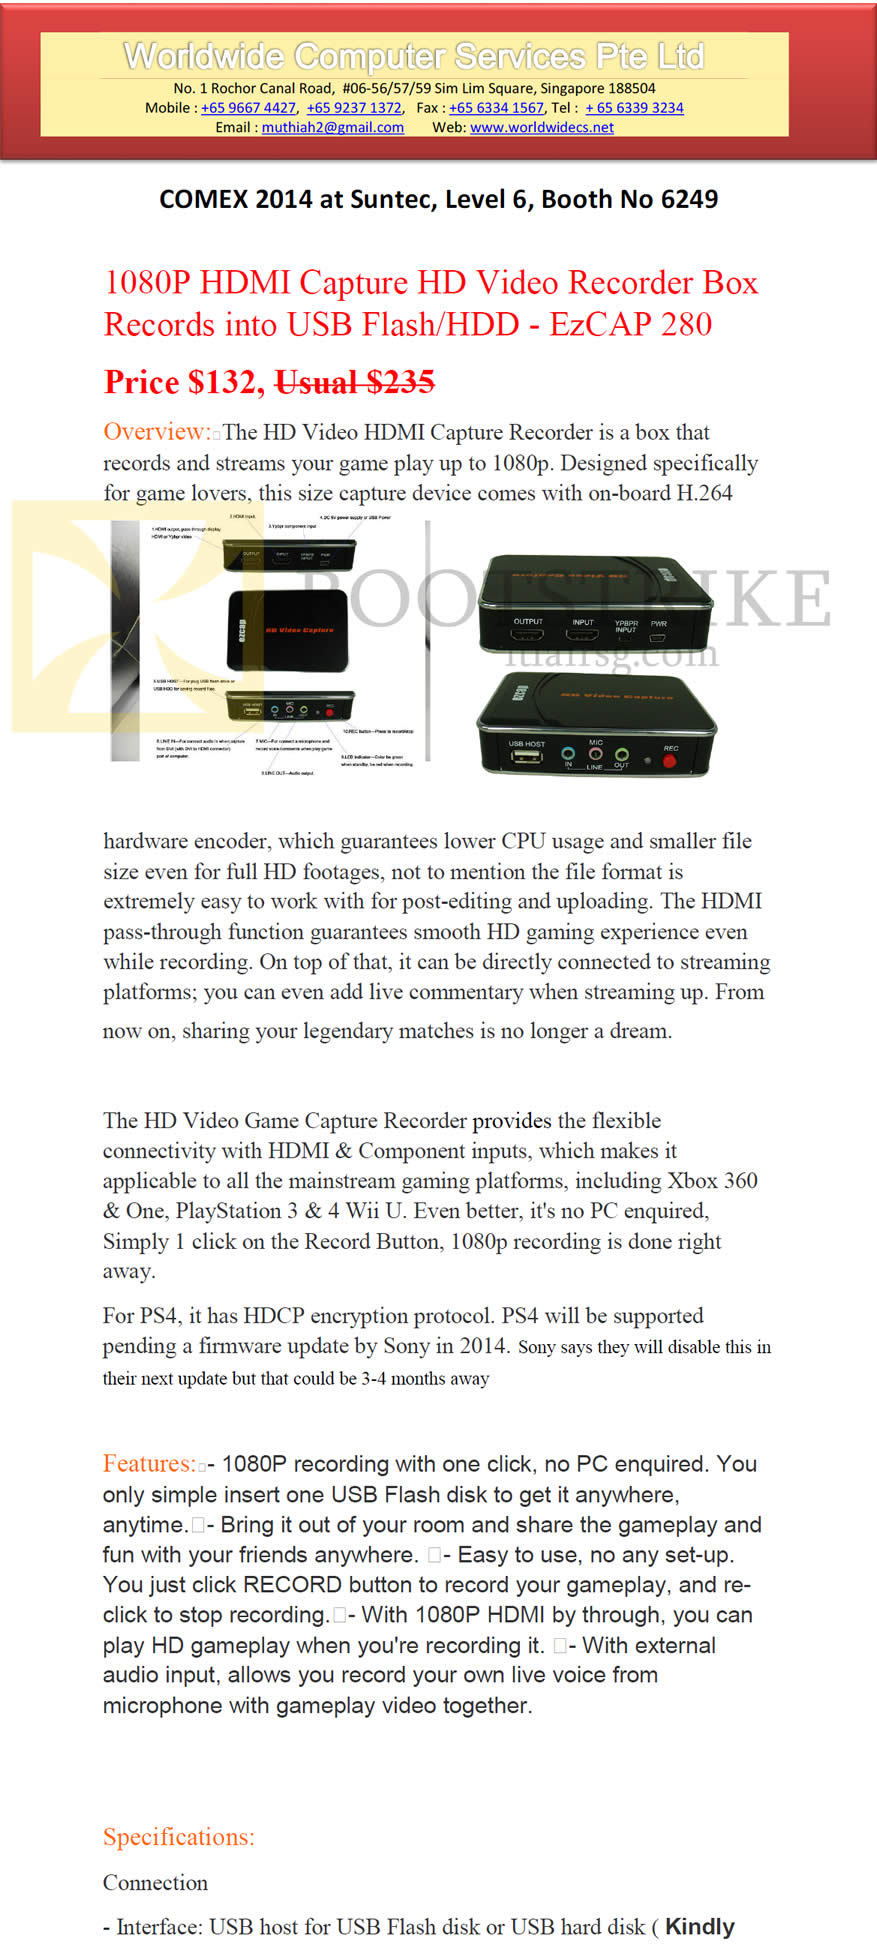 COMEX 2014 price list image brochure of Worldwide Computer Services HDMI Capture HD Video Recorder Box